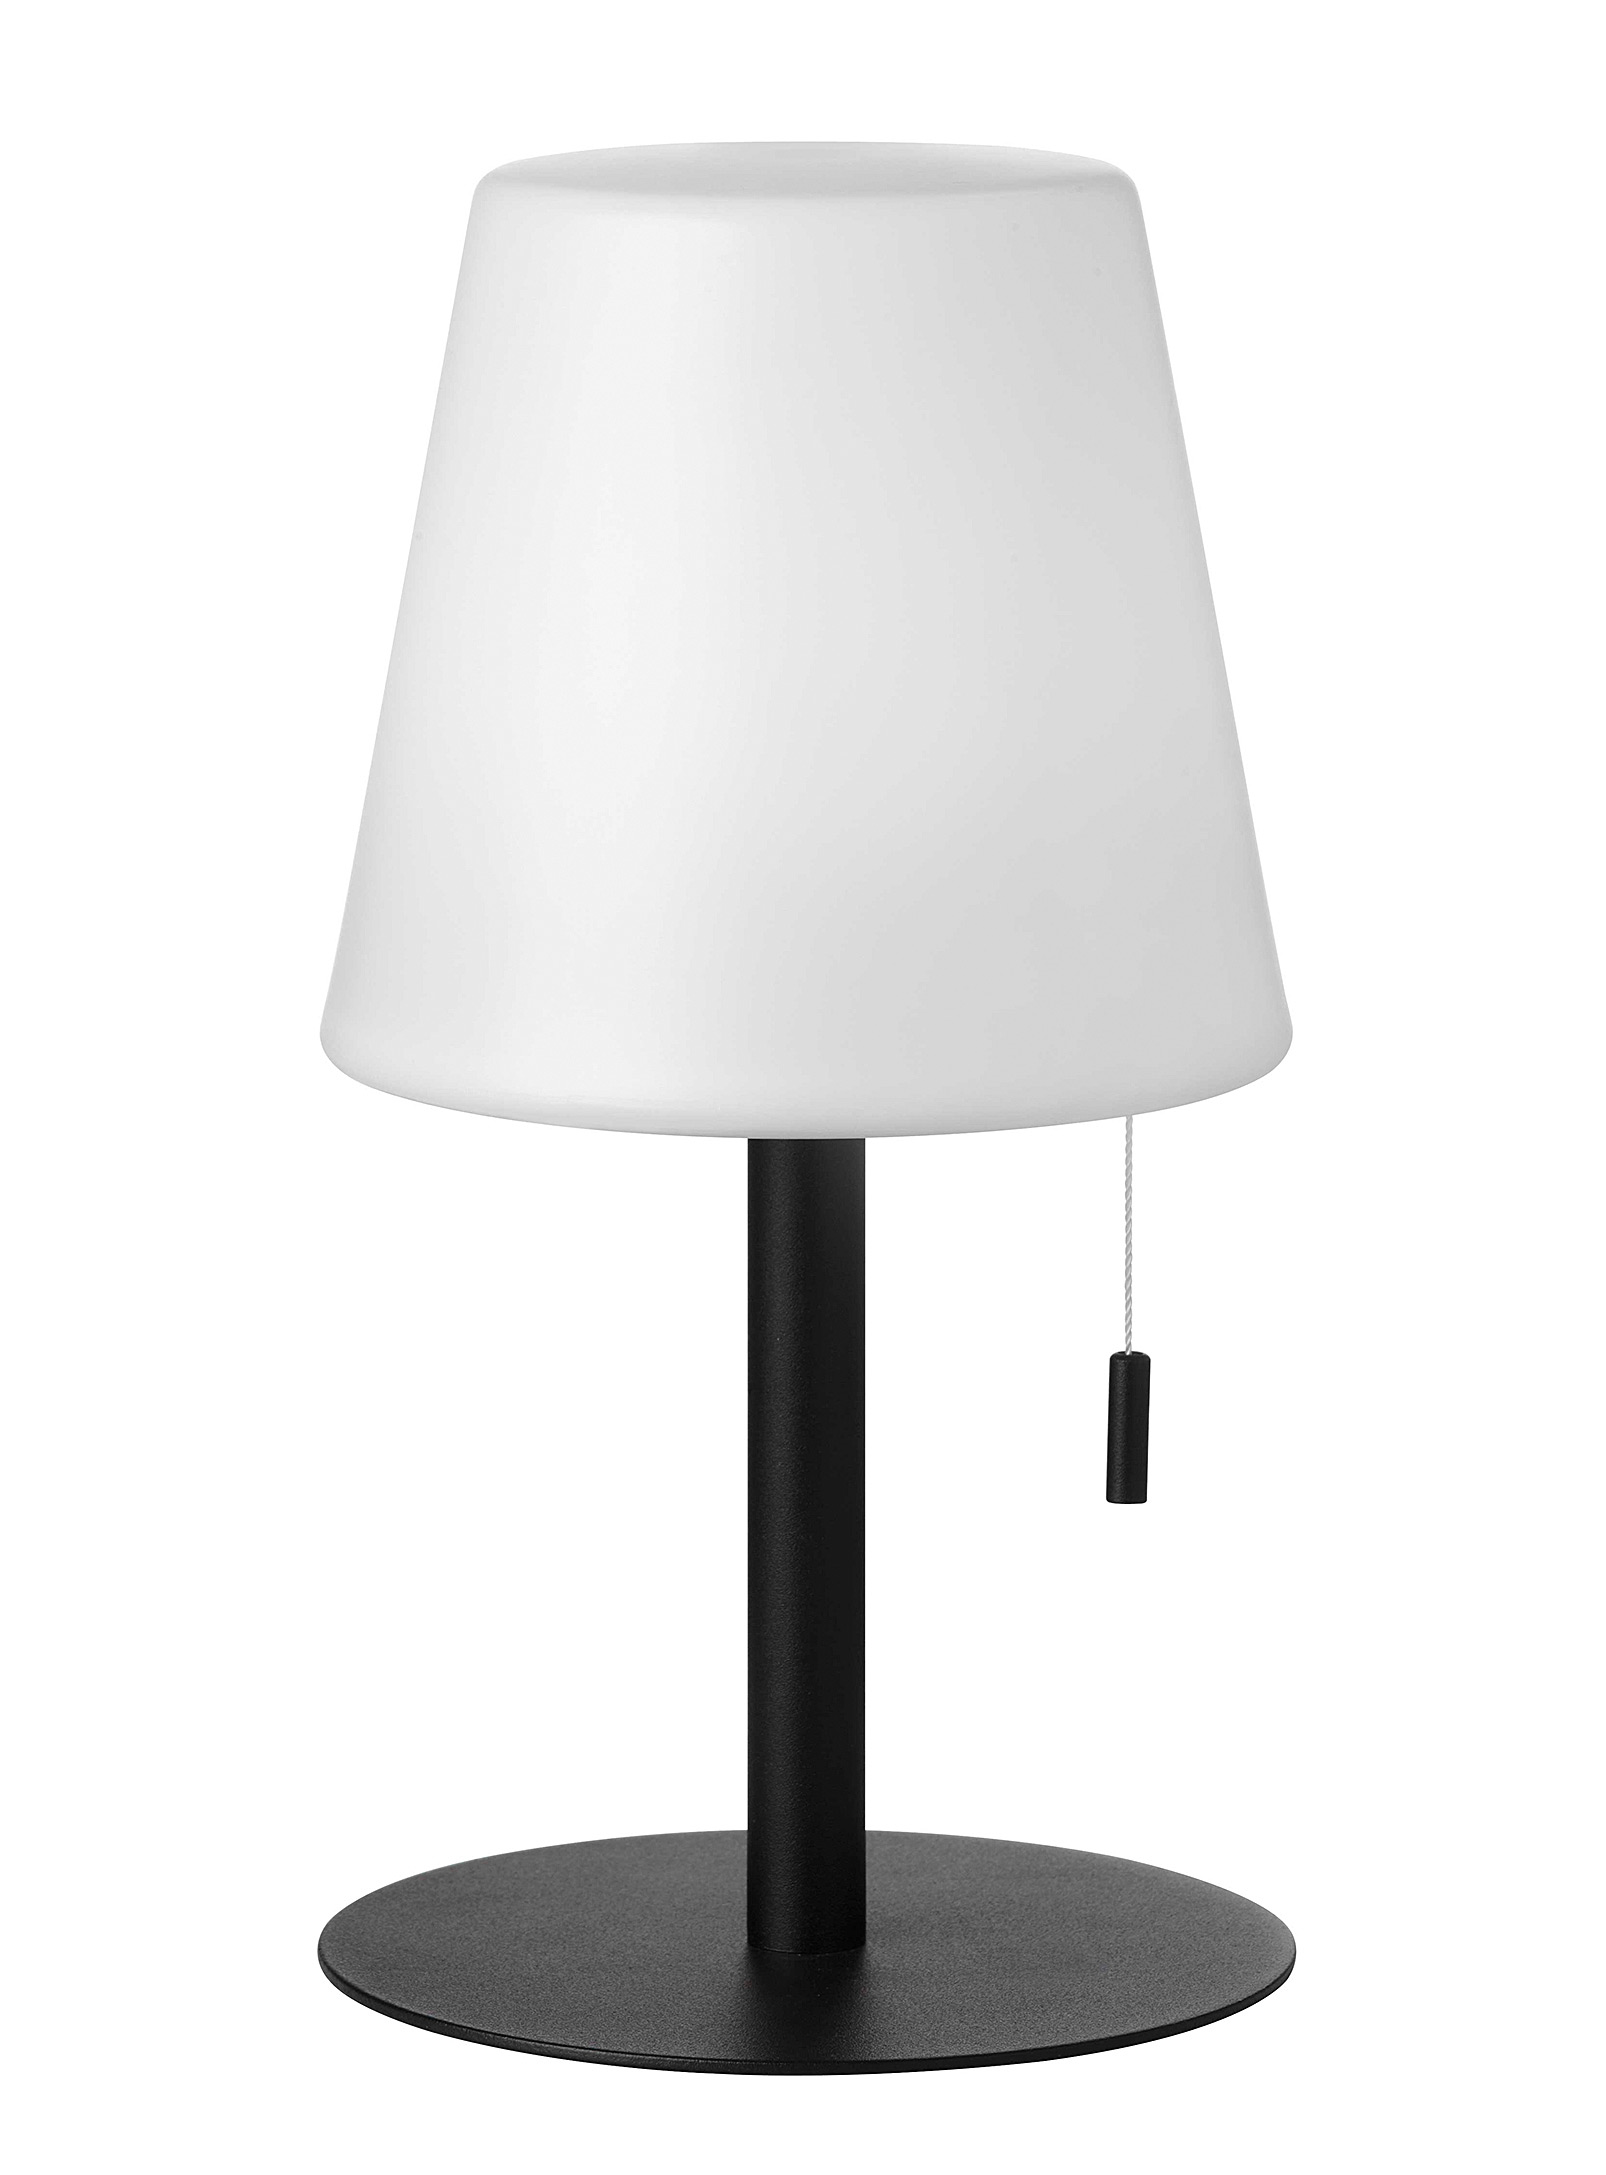 Simons Maison - Timeless rechargeable table lamp